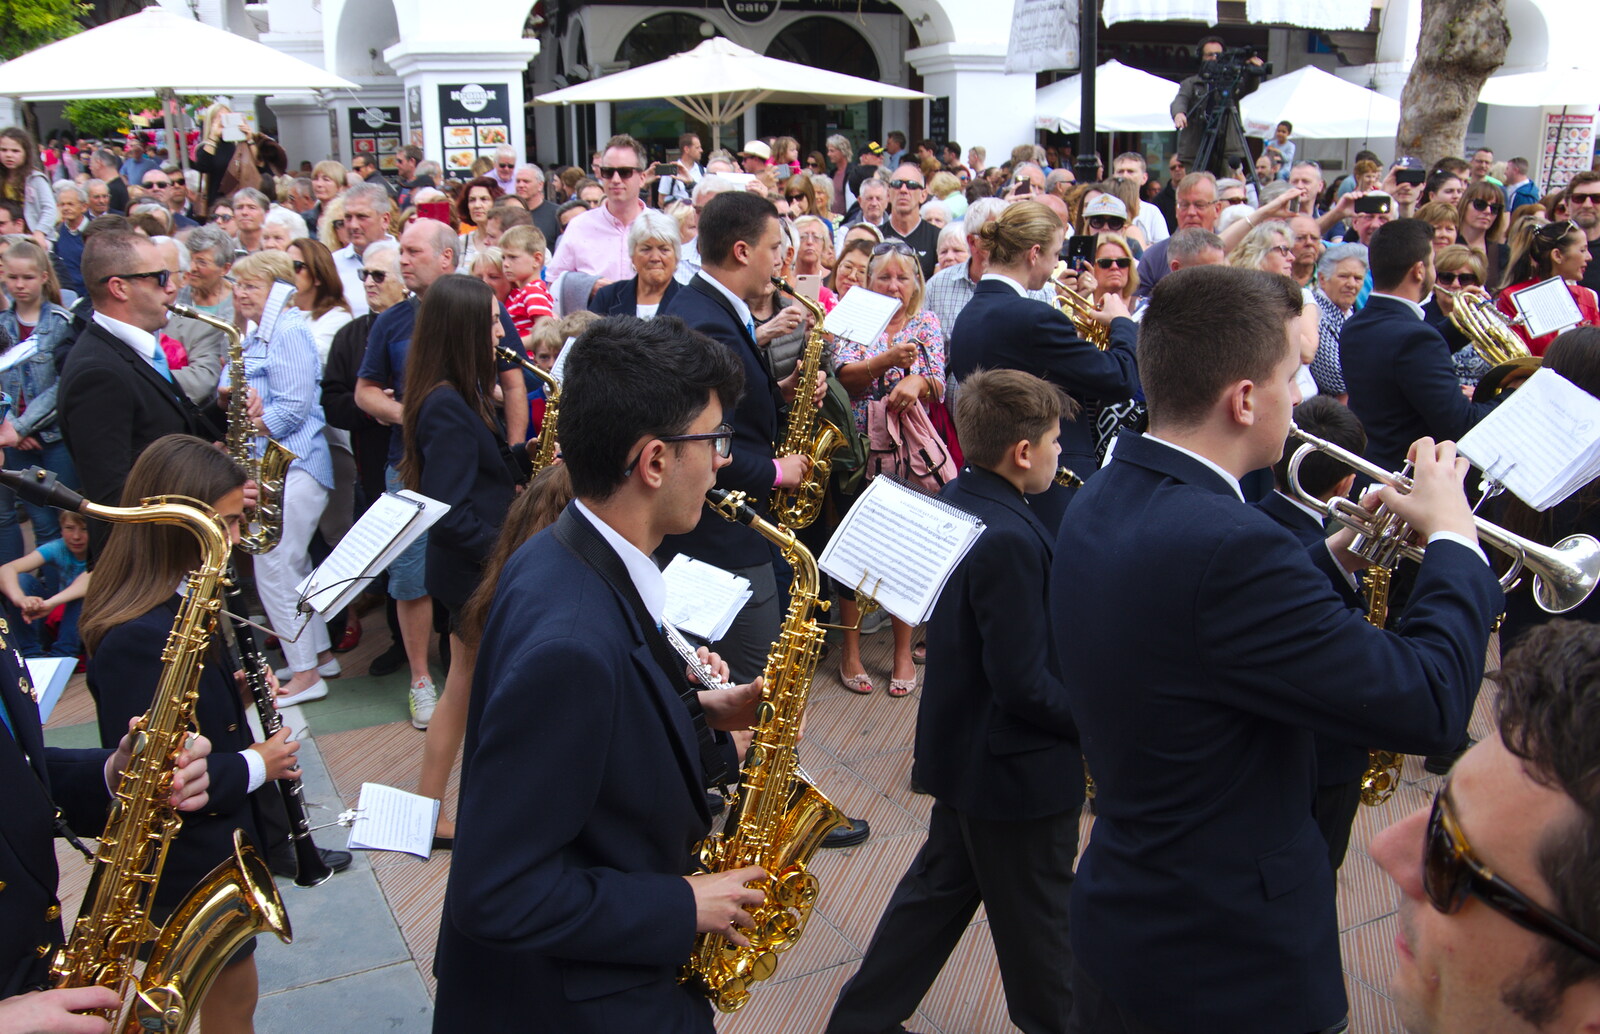 The saxophone section of another band marches past from An Easter Parade, Nerja, Andalusia, Spain - 21st April 2019